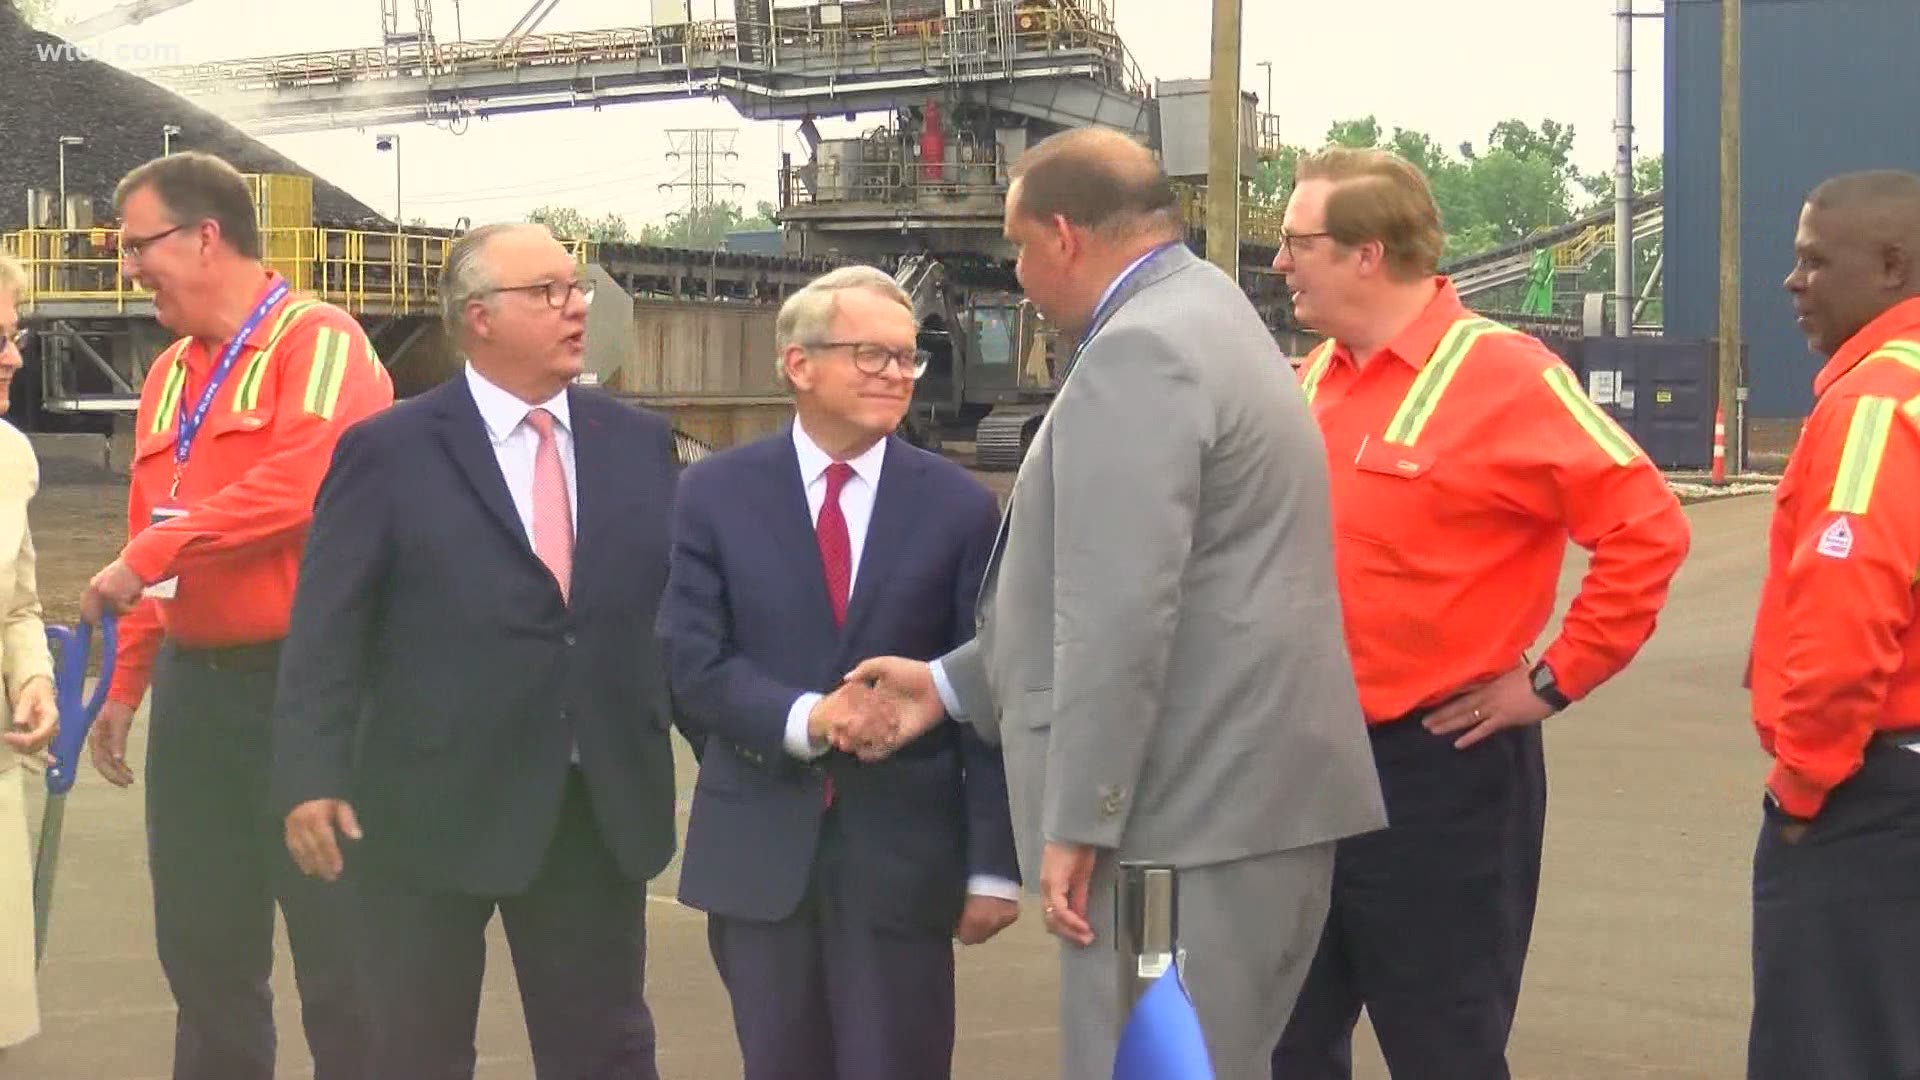 City and state leaders cut the ribbon to celebrate operating in Toledo for 6 months now.